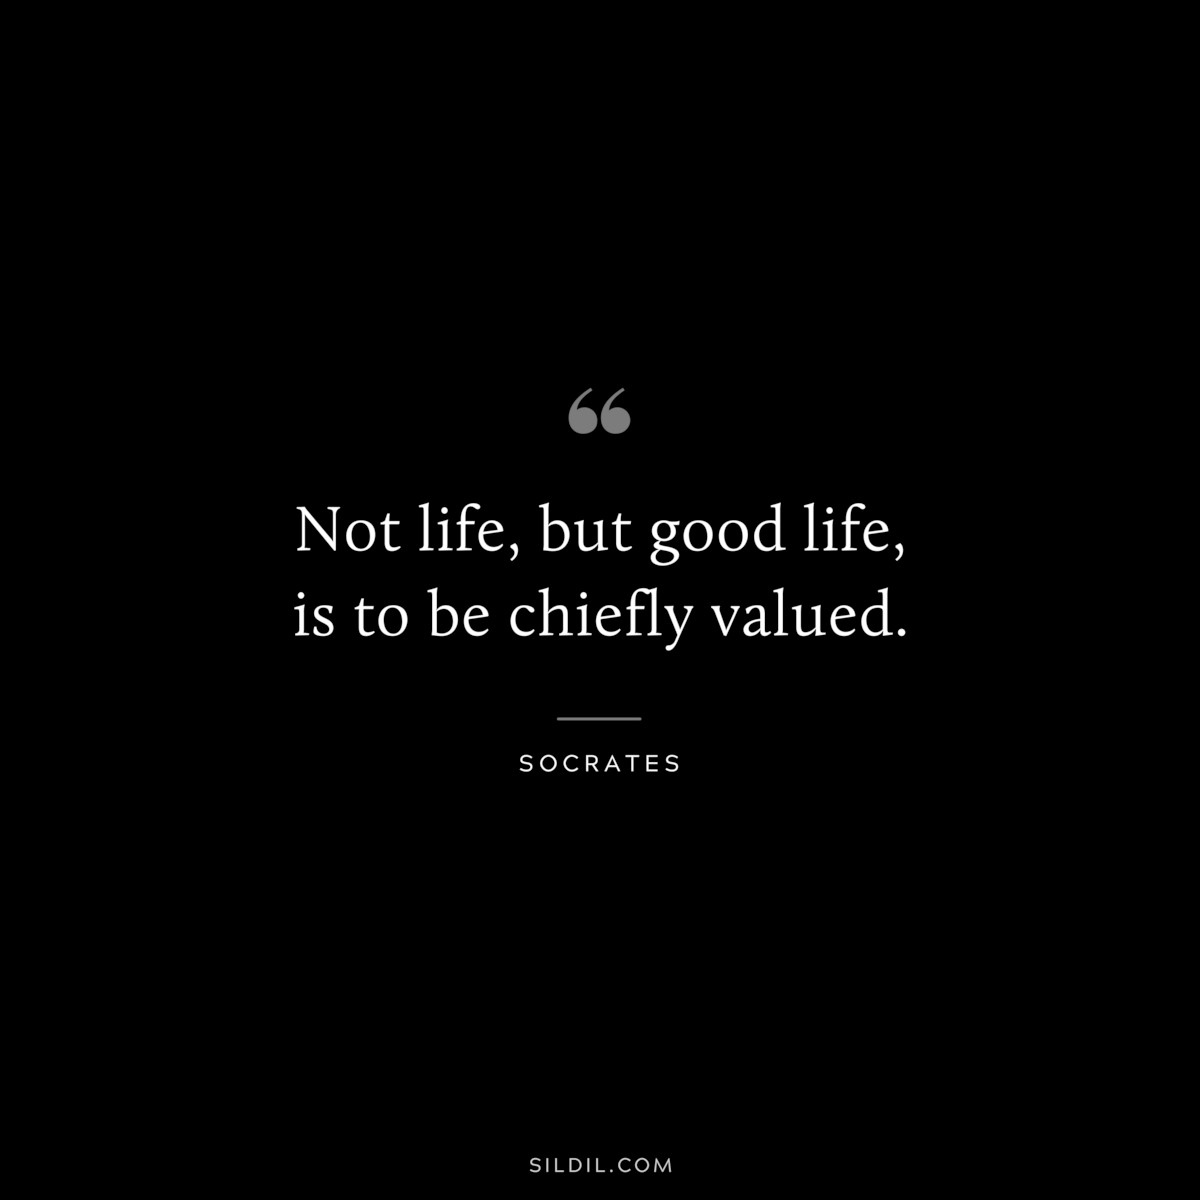 Not life, but good life, is to be chiefly valued. ― Socrates